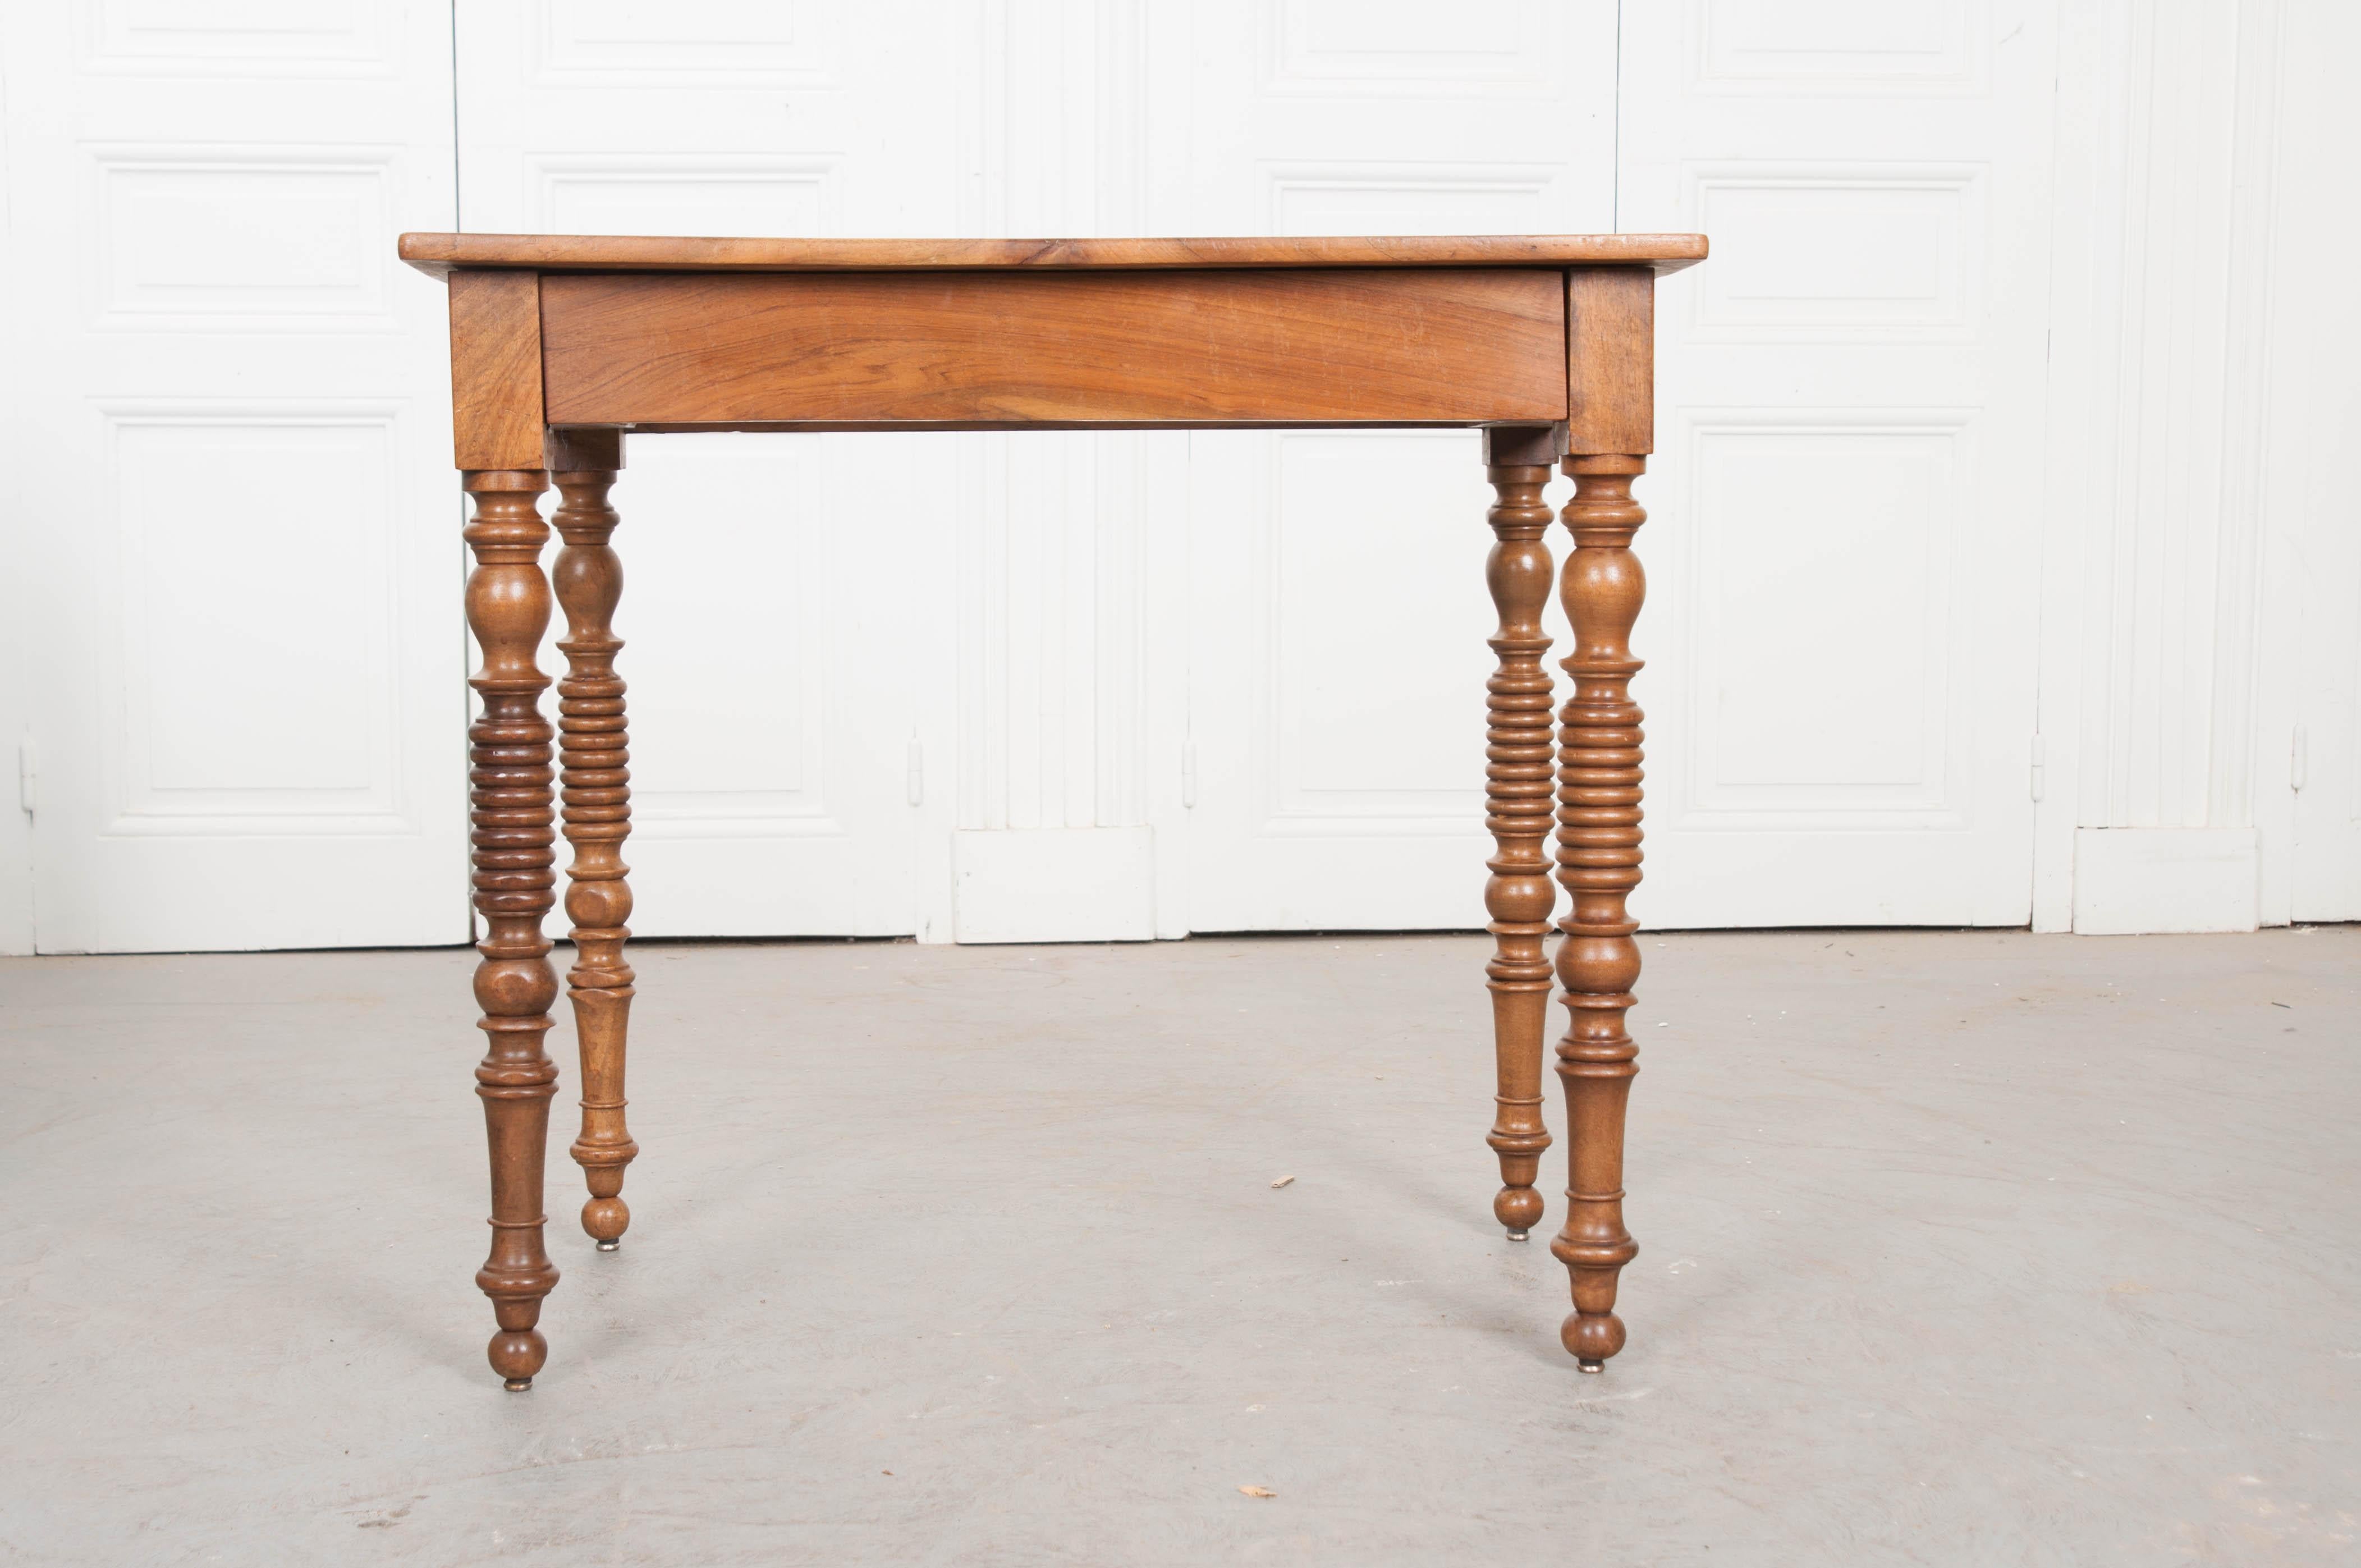 A friendly little walnut writing table from 1880's France. This exceptional little desk has been made using beautiful, solid walnut. Within the apron resides a hidden drawer that can accommodate storage for pens, paper, stationary and various